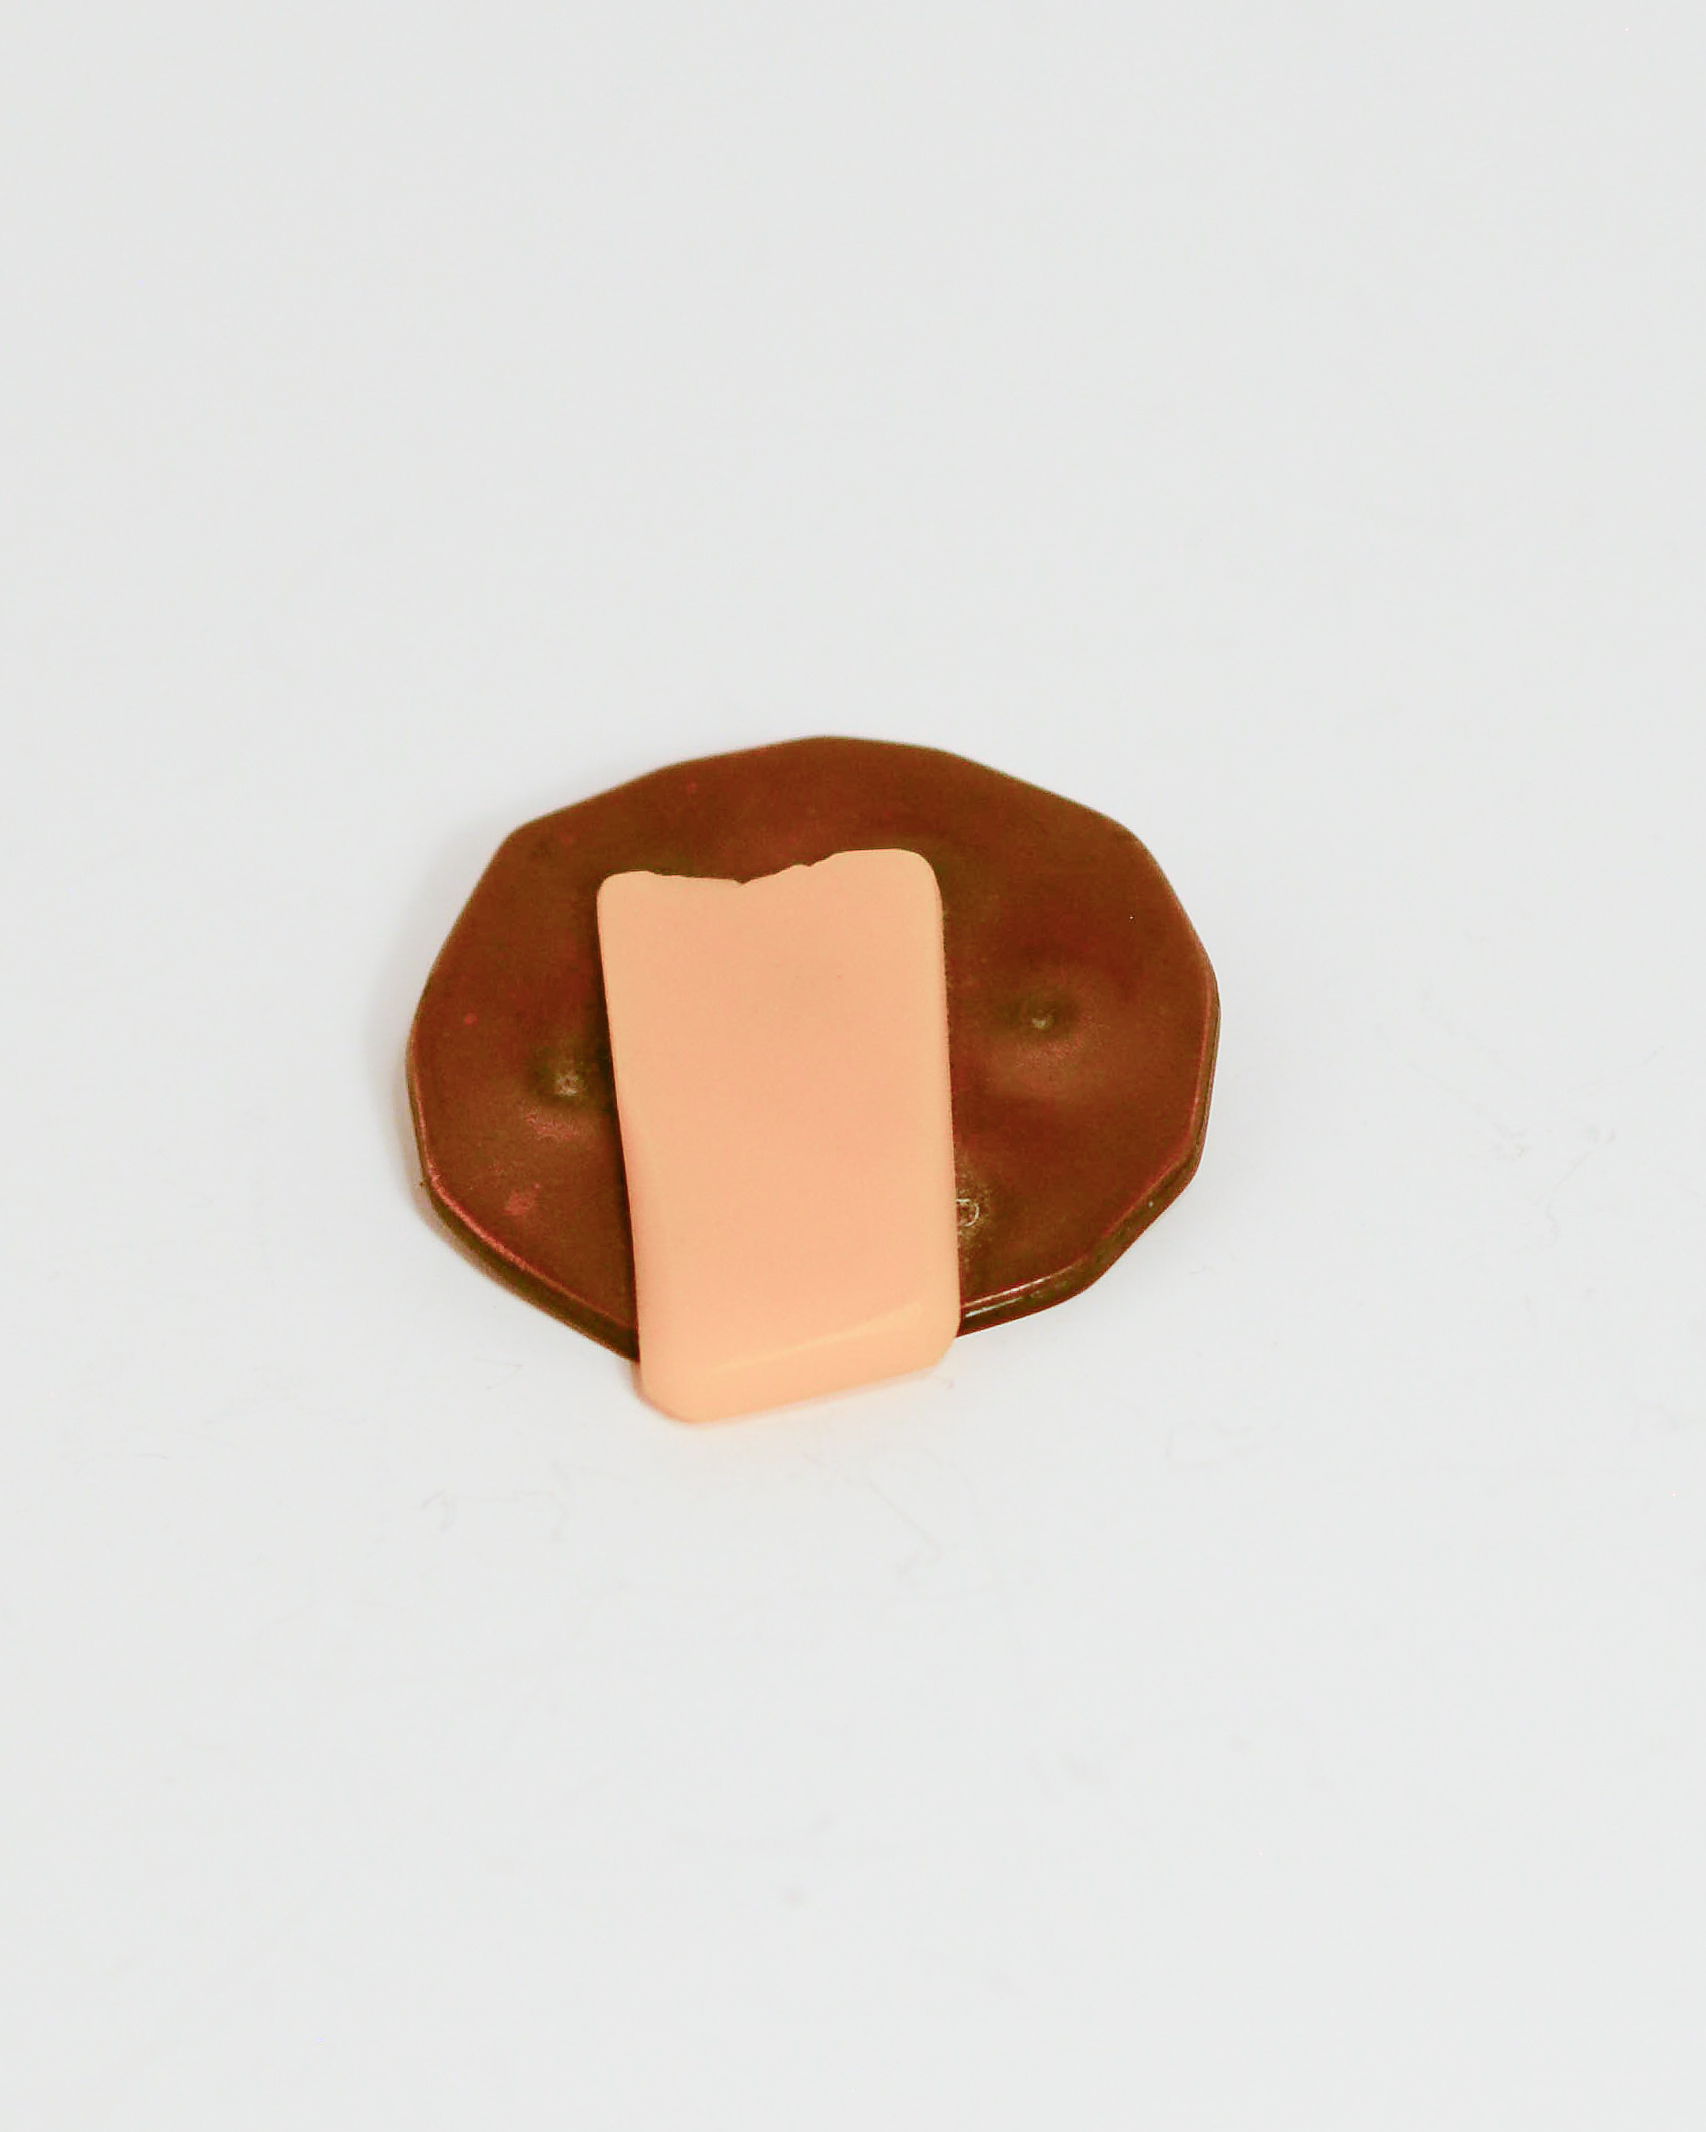 05. Constructed Cheese Cracker Brooch. Copper with Plexi Cheese. 2 x 2.25 . 1980. NFS 1